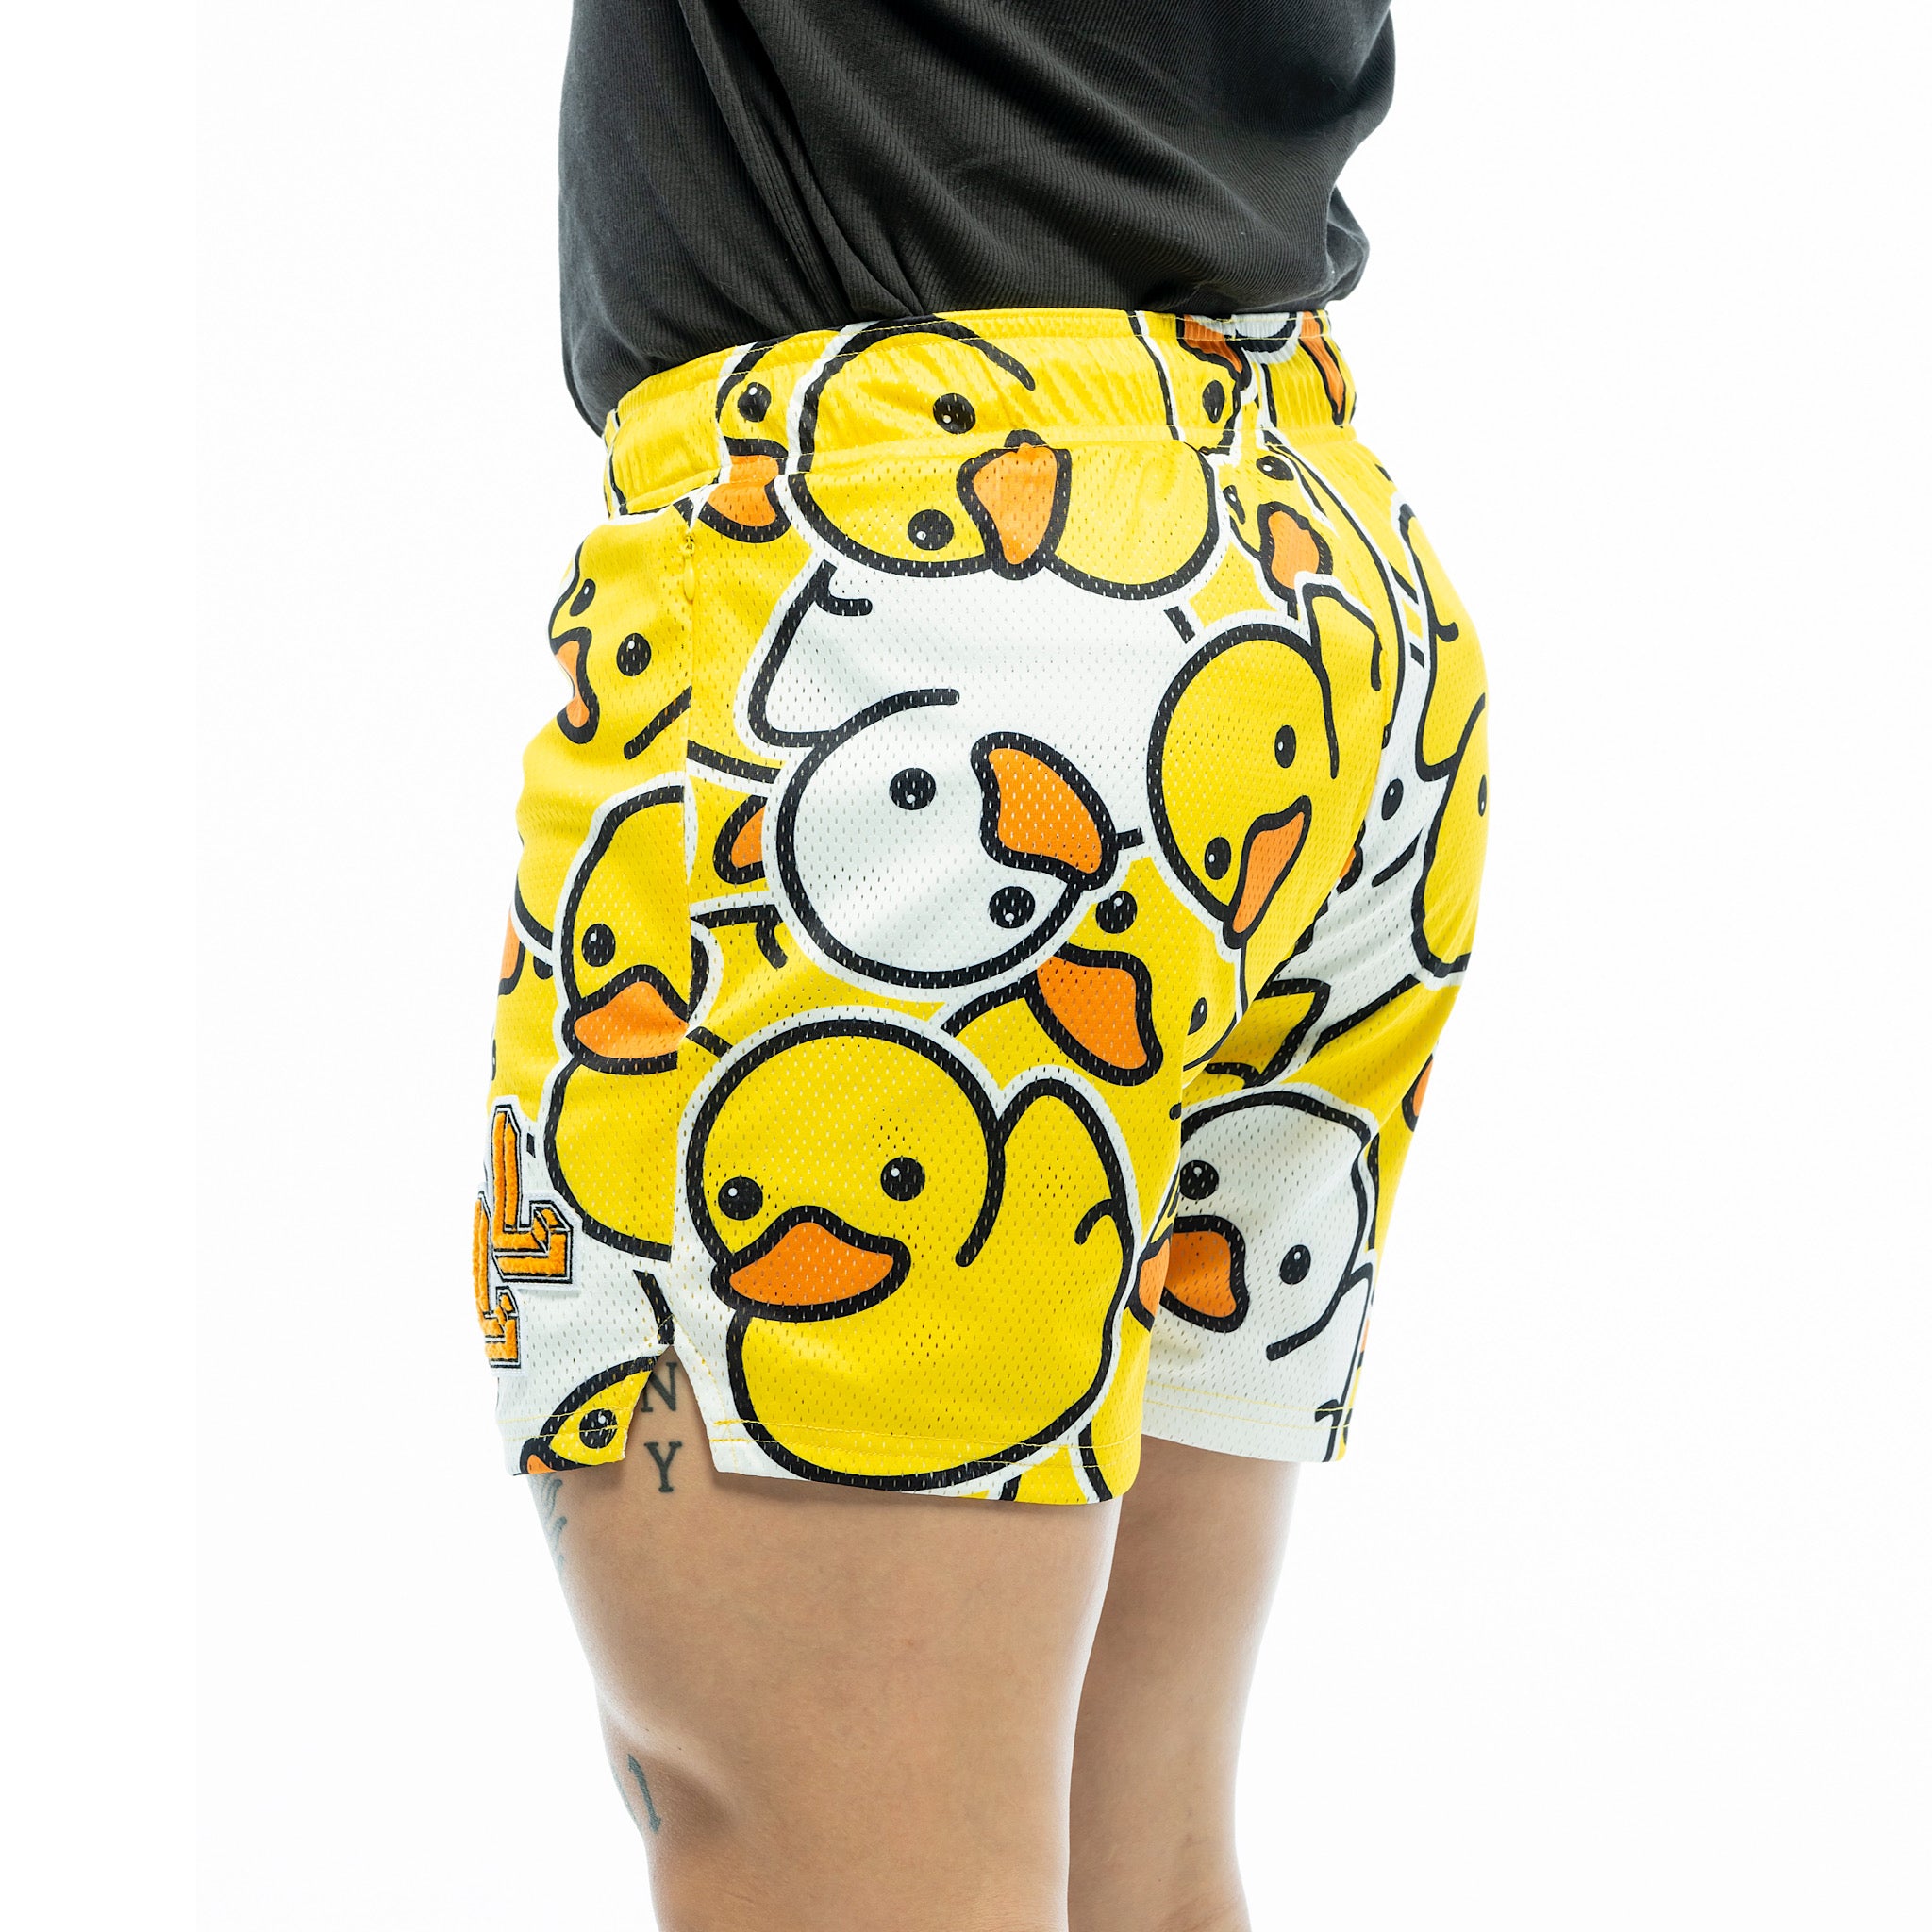 Ducky workout shorts